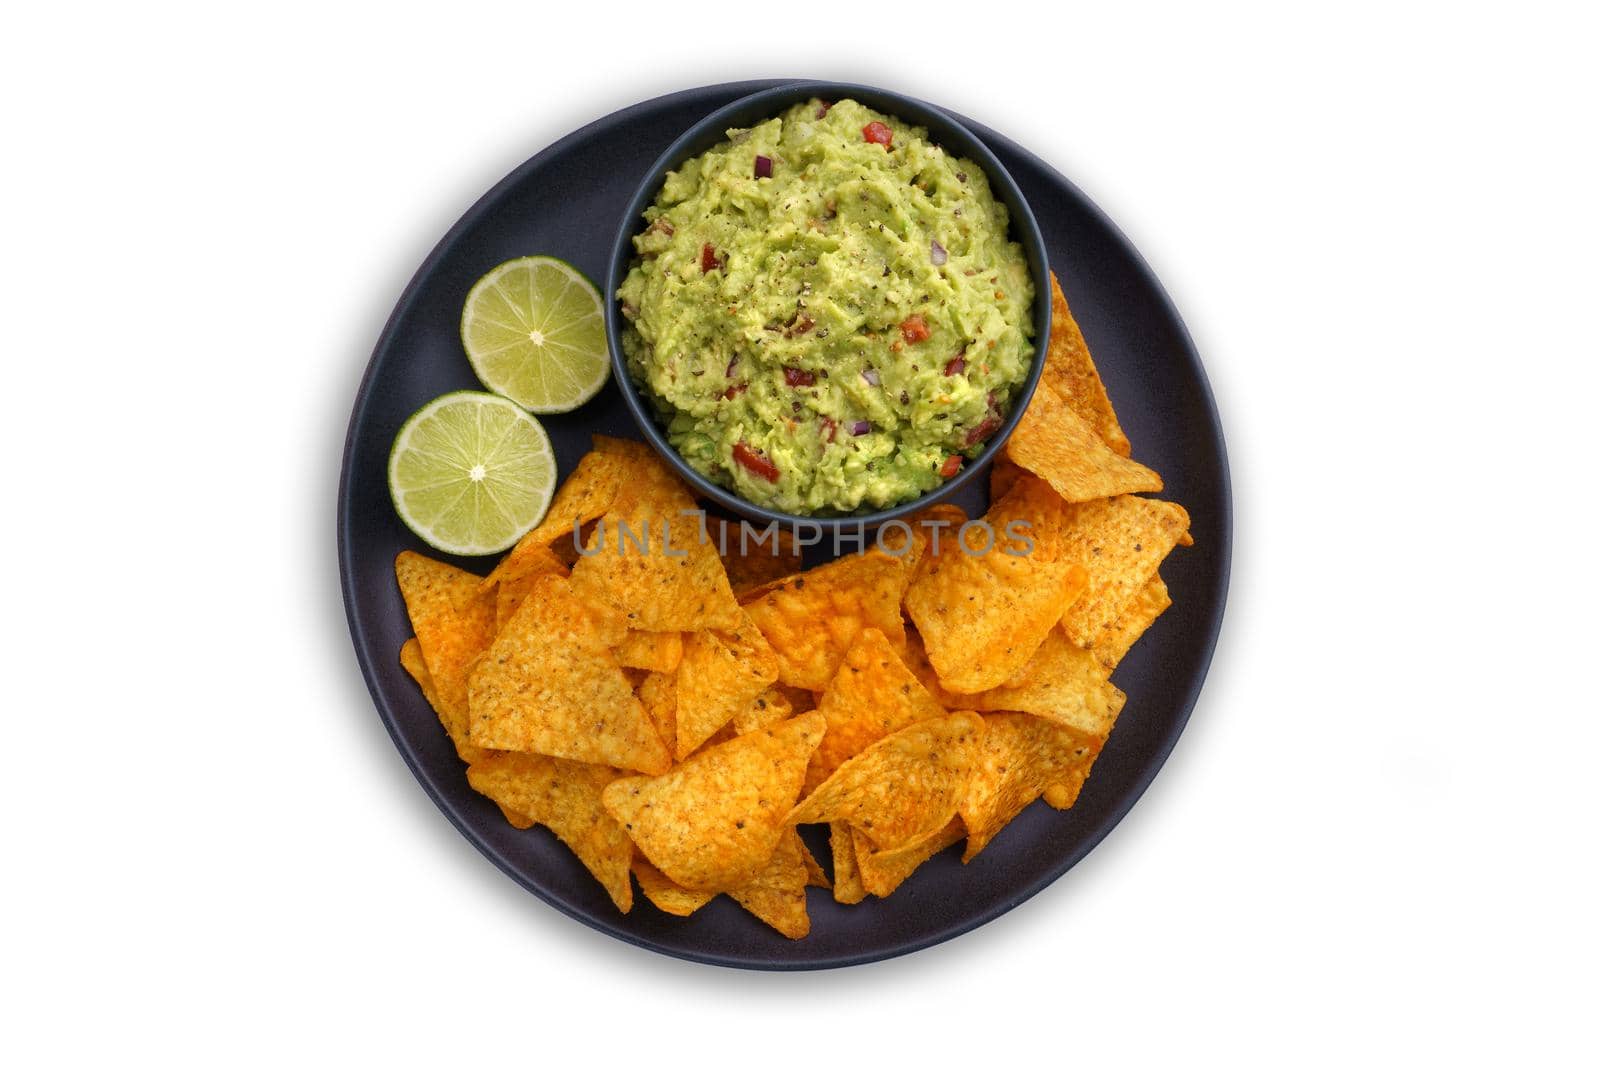 Top view of guacamole dip in black plate with tortilla chips or nachos isolated on a white background by DariaKulkova